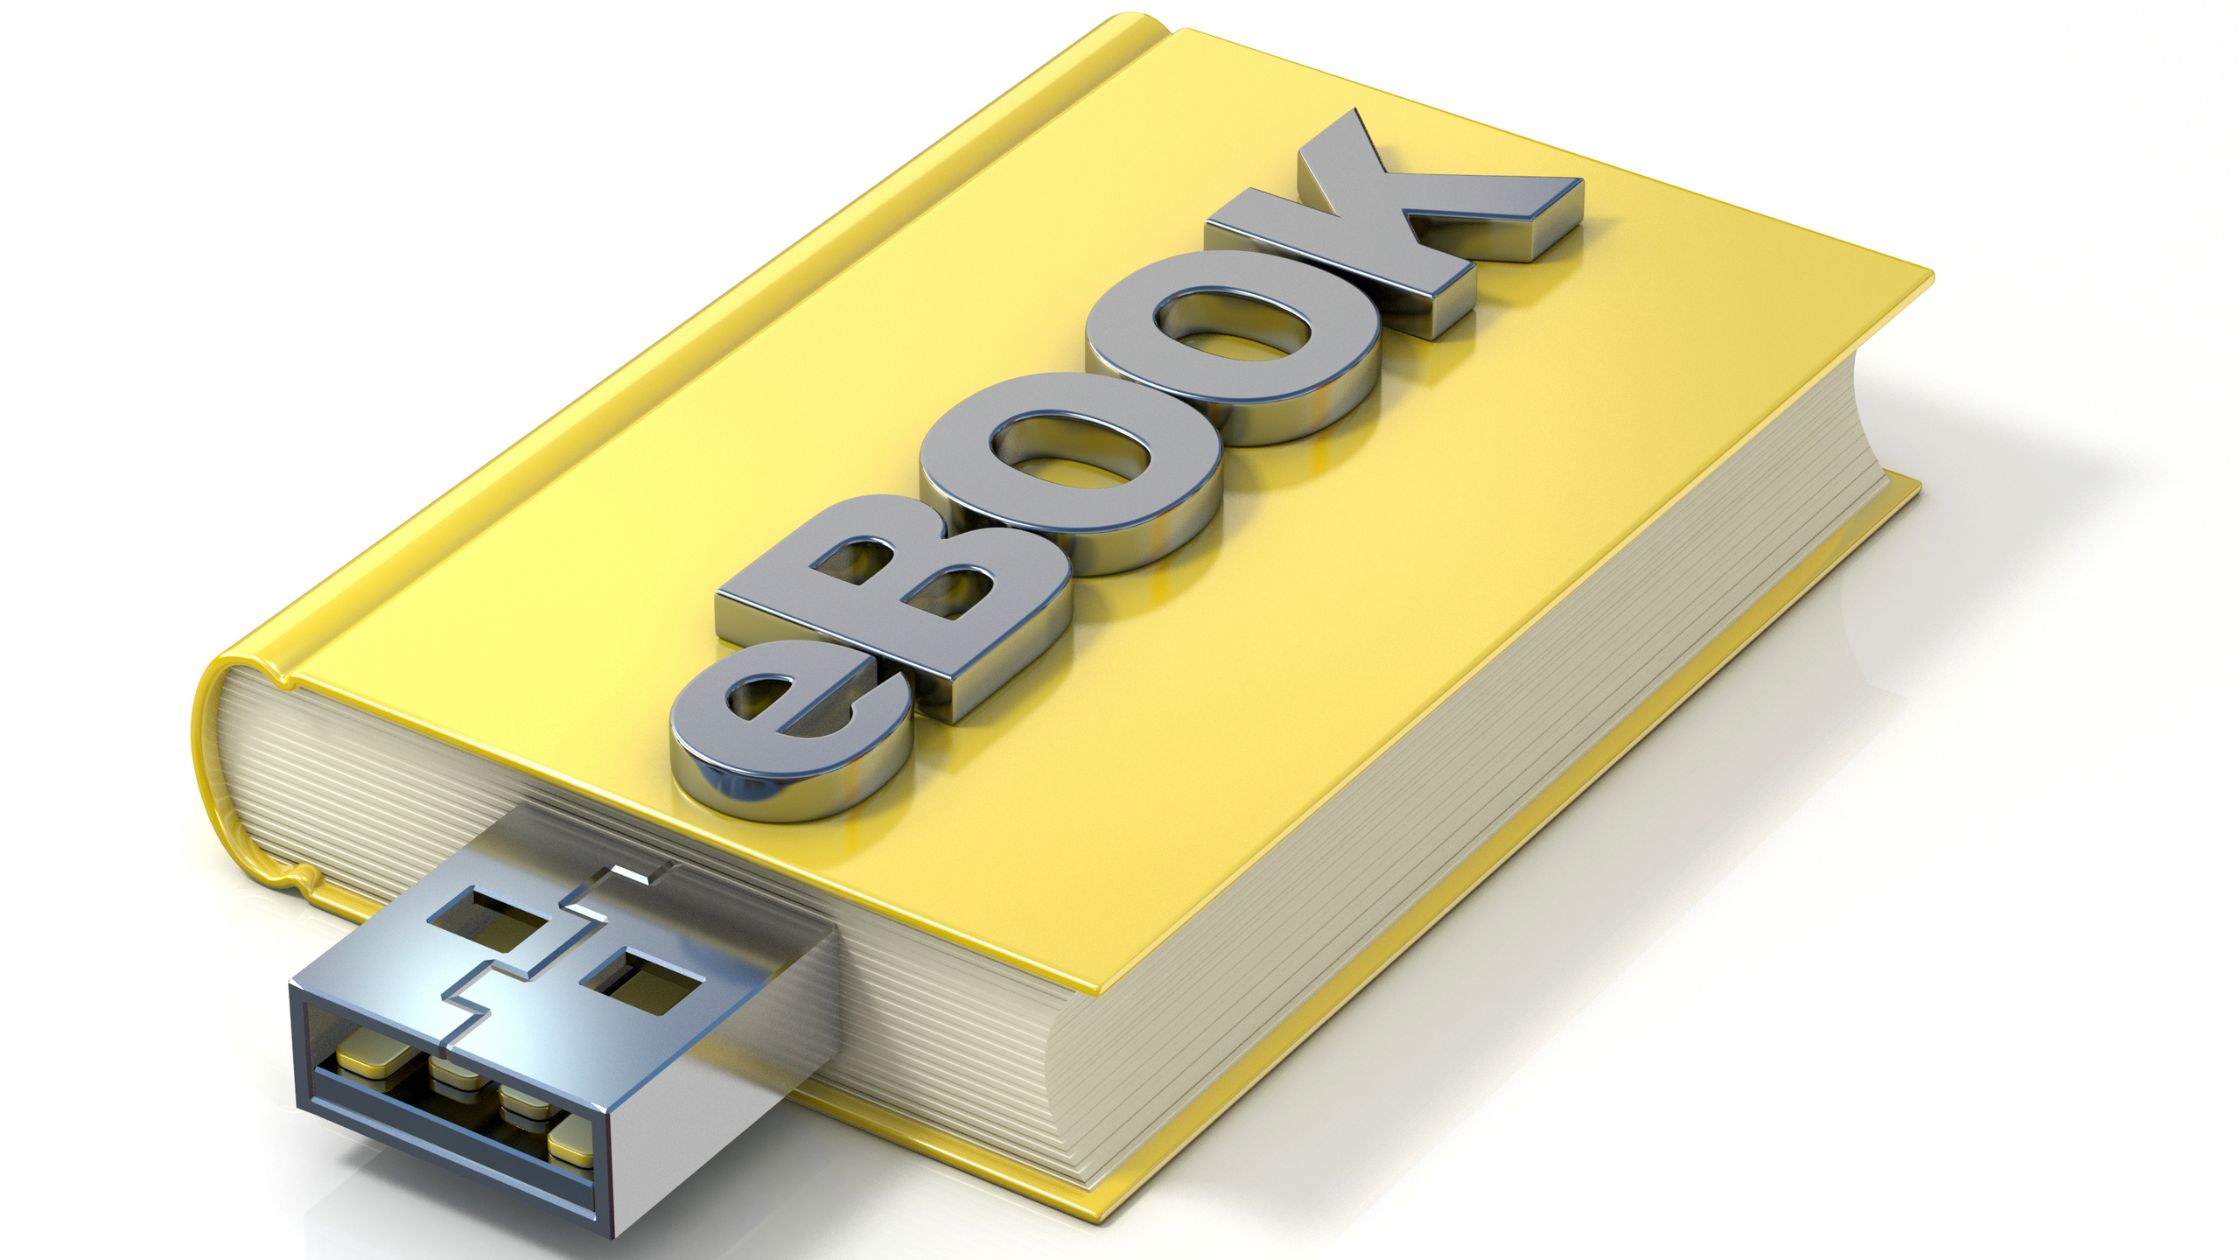 are-we-ready-to-e-publish-in-india-the-e-publishing-trends-for-india